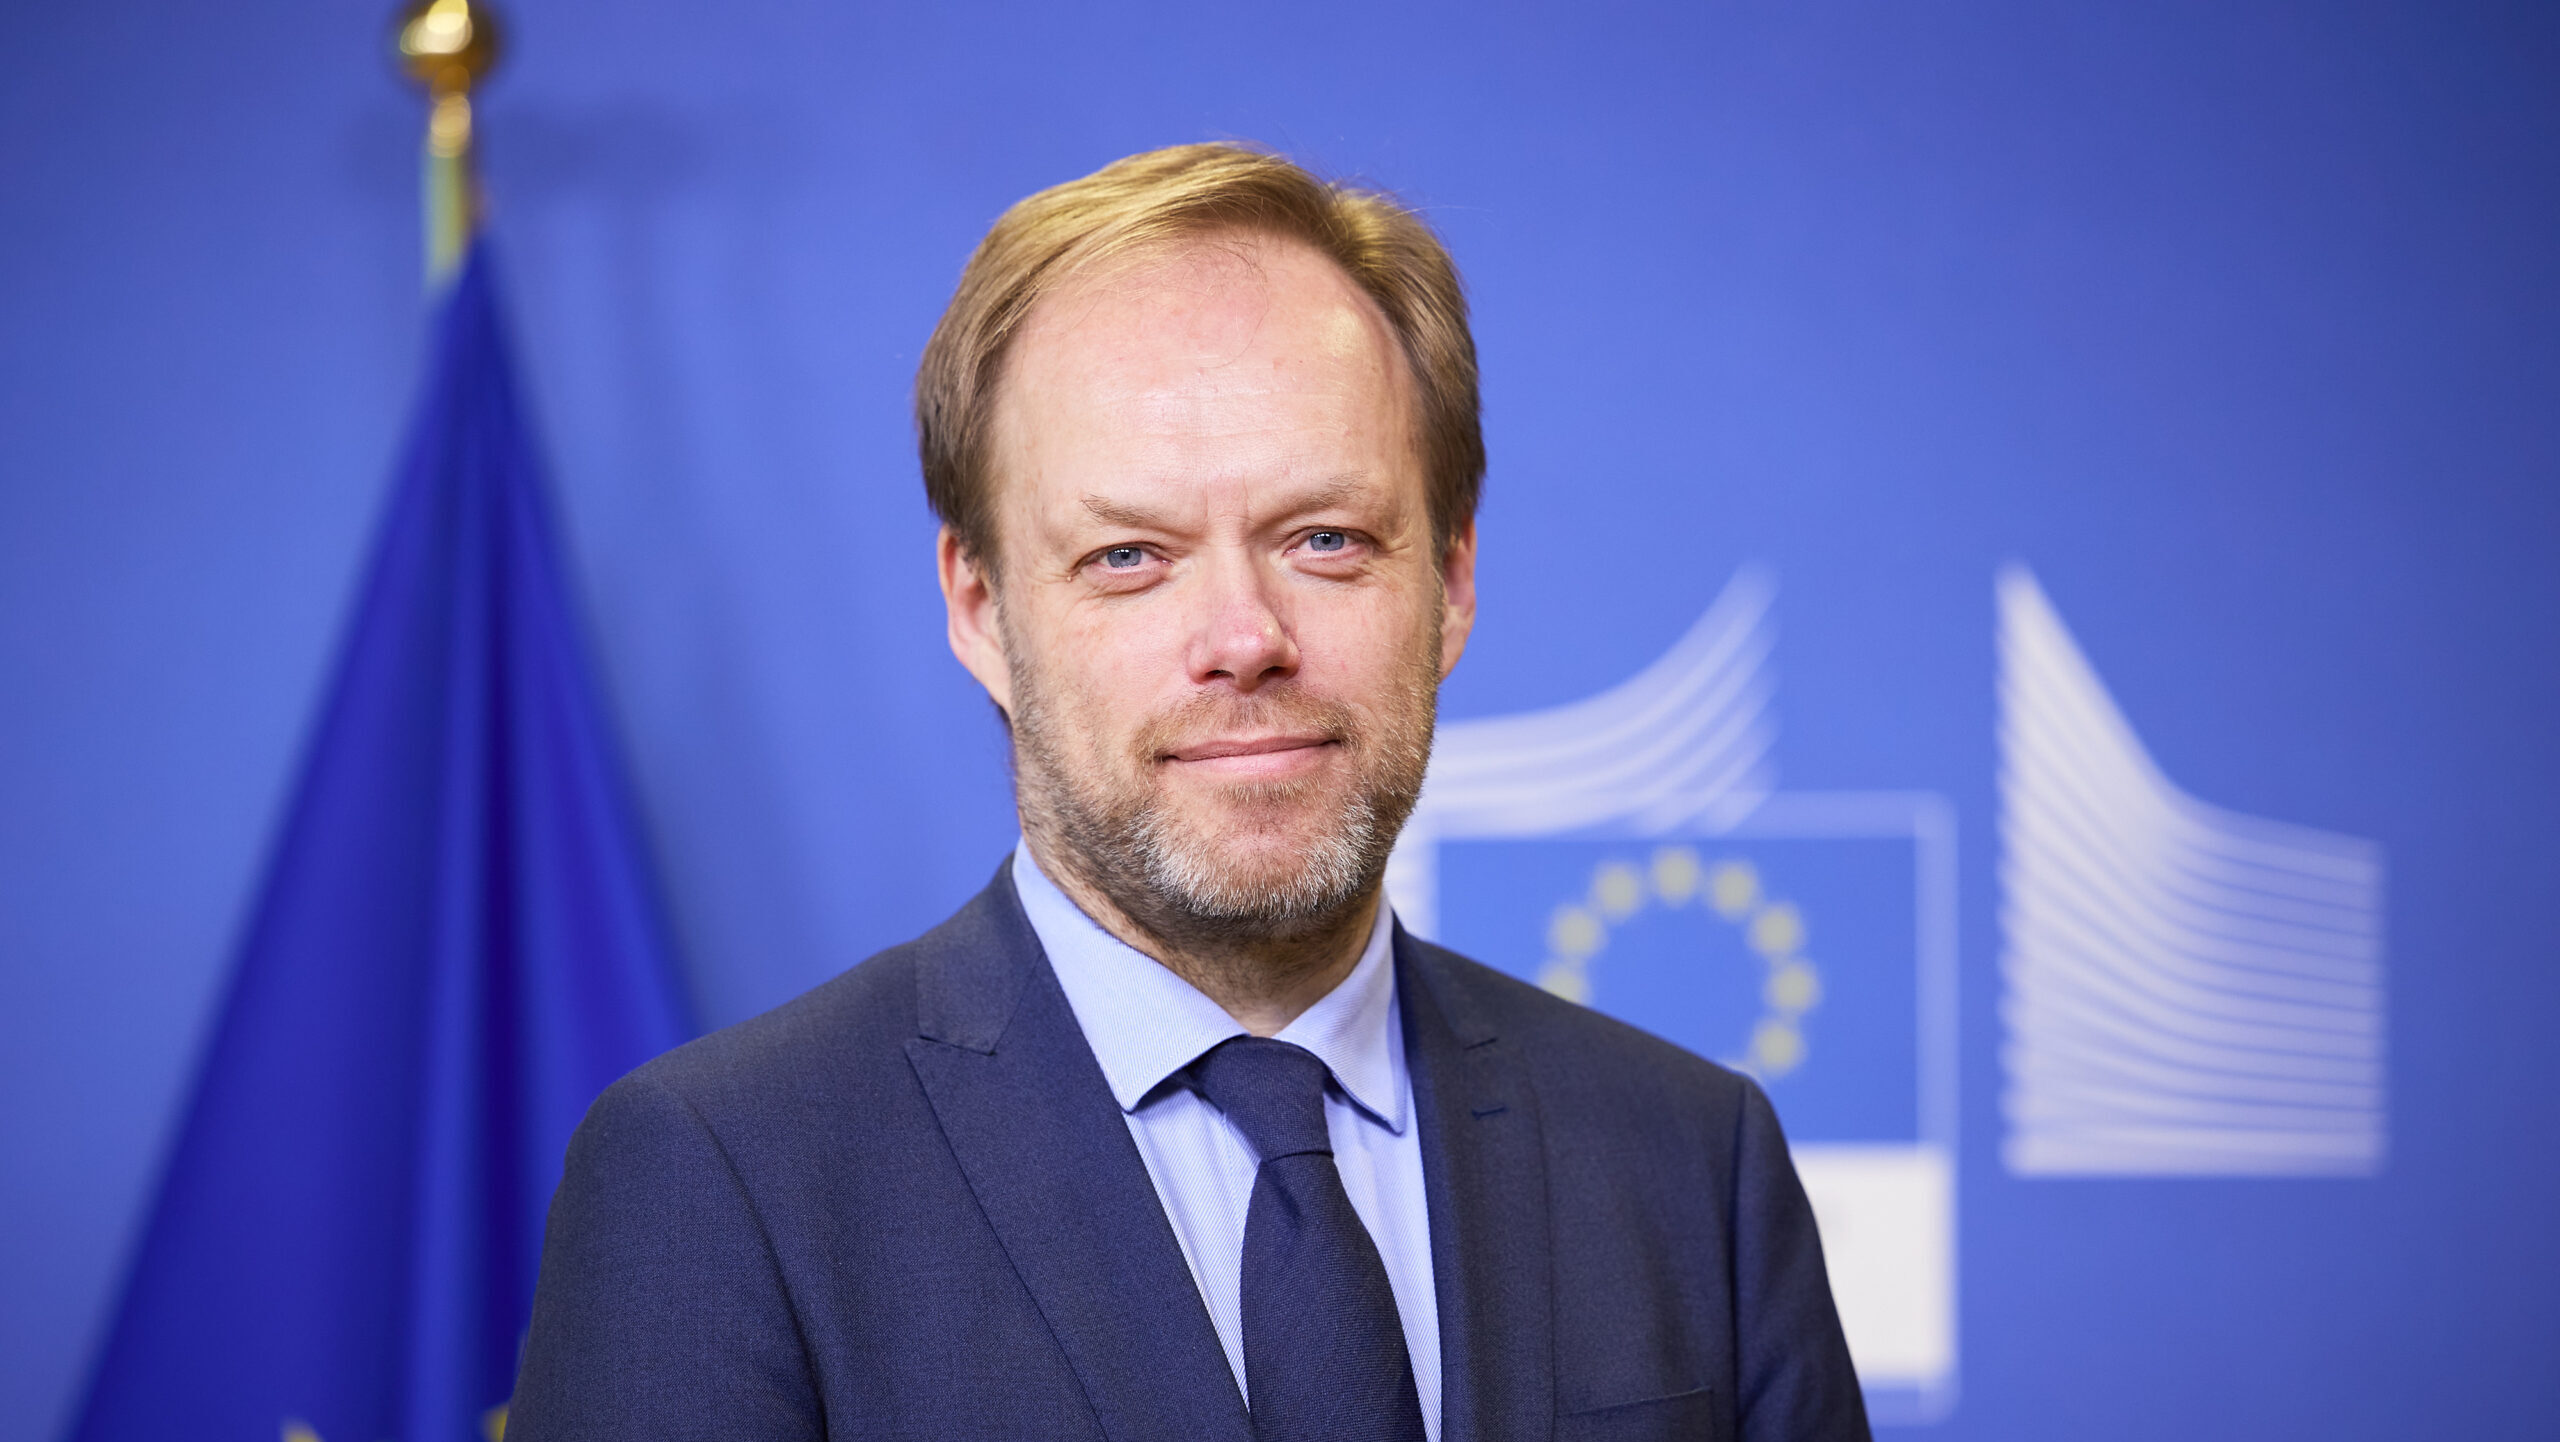 OPR speaks with European Commission’s Director-General for Climate Action, Kurt Vandenberghe